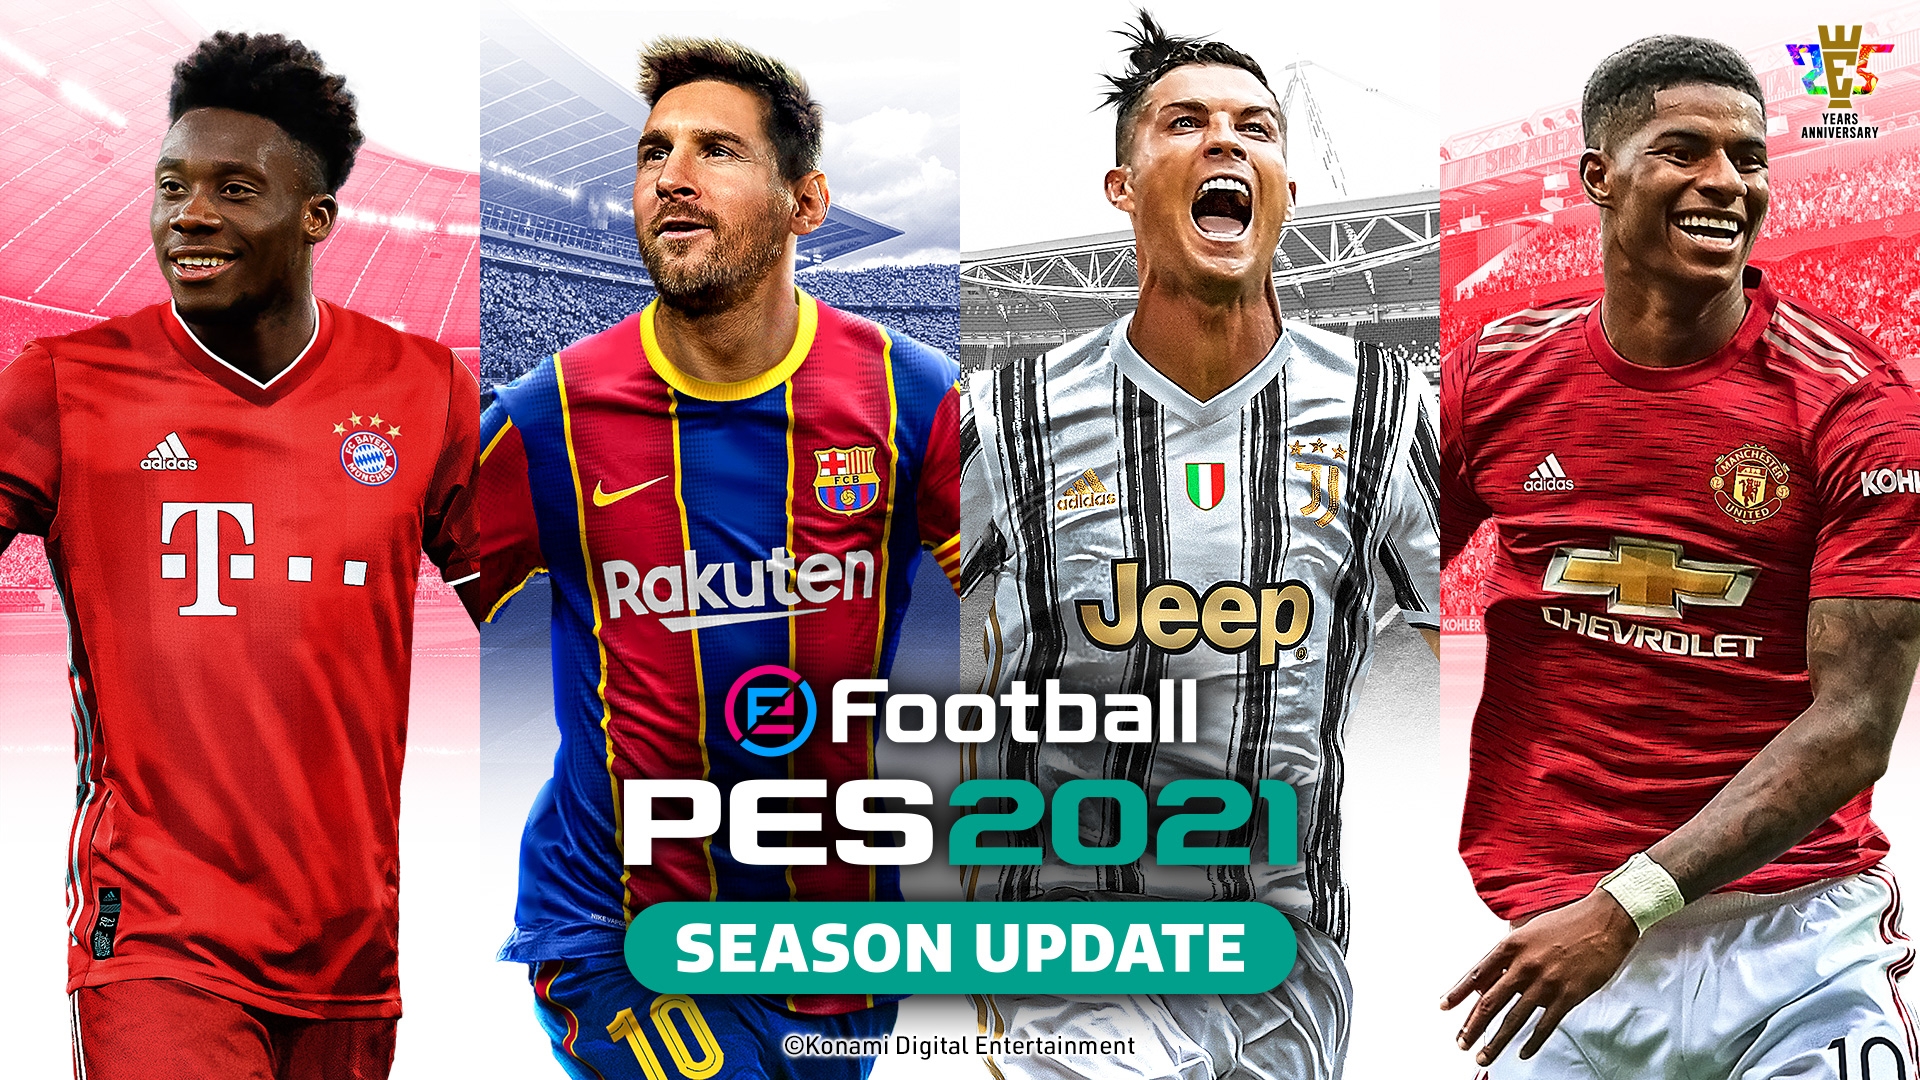 Patch malaysia pes 2021 mobile